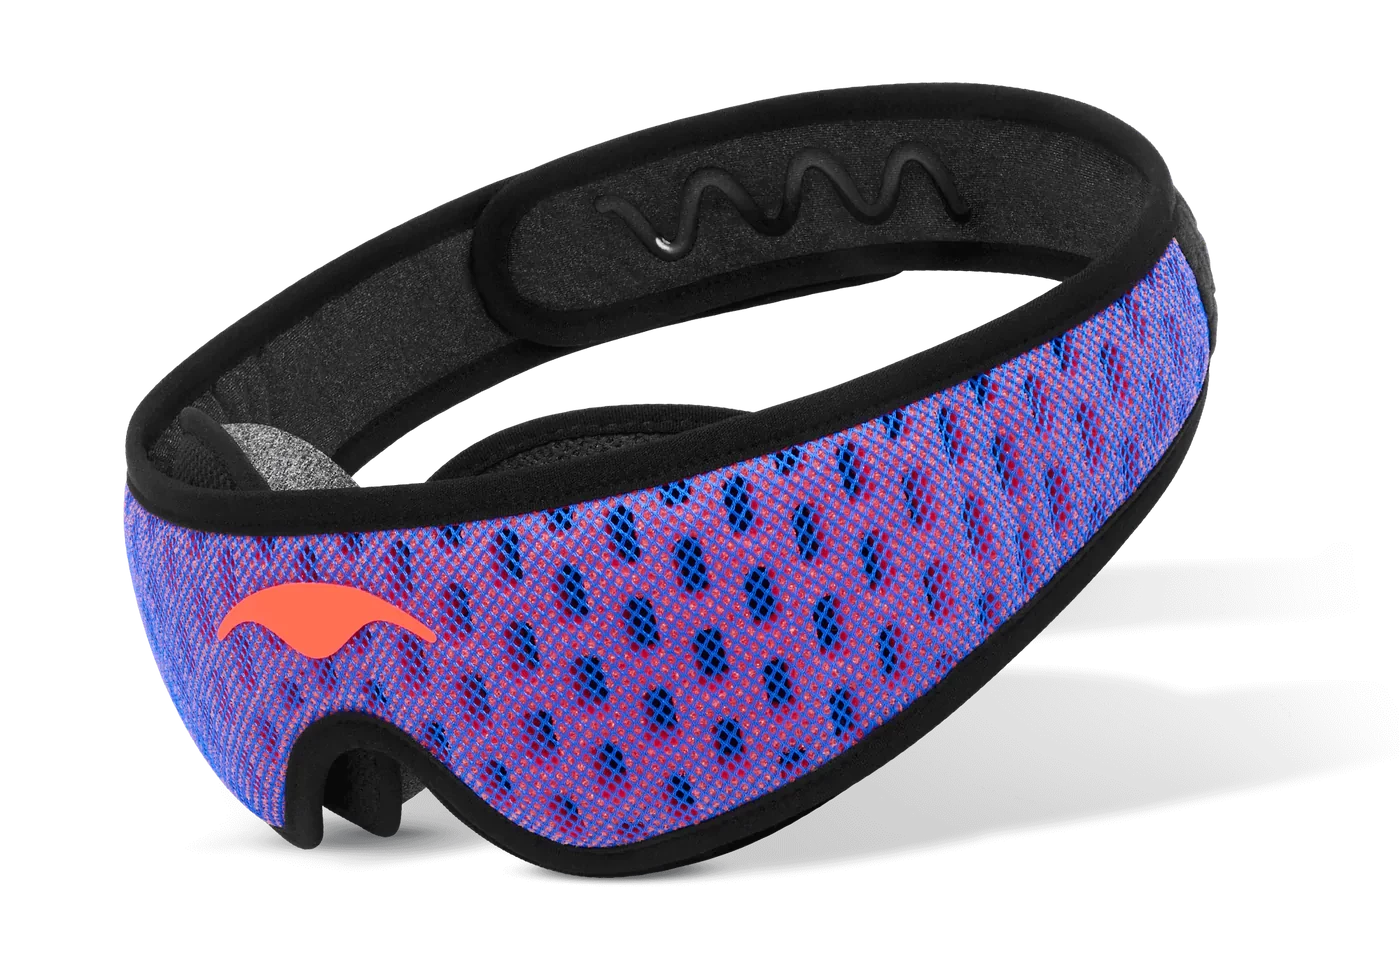 A blue mesh sleep mask with eye cups for side sleepers.